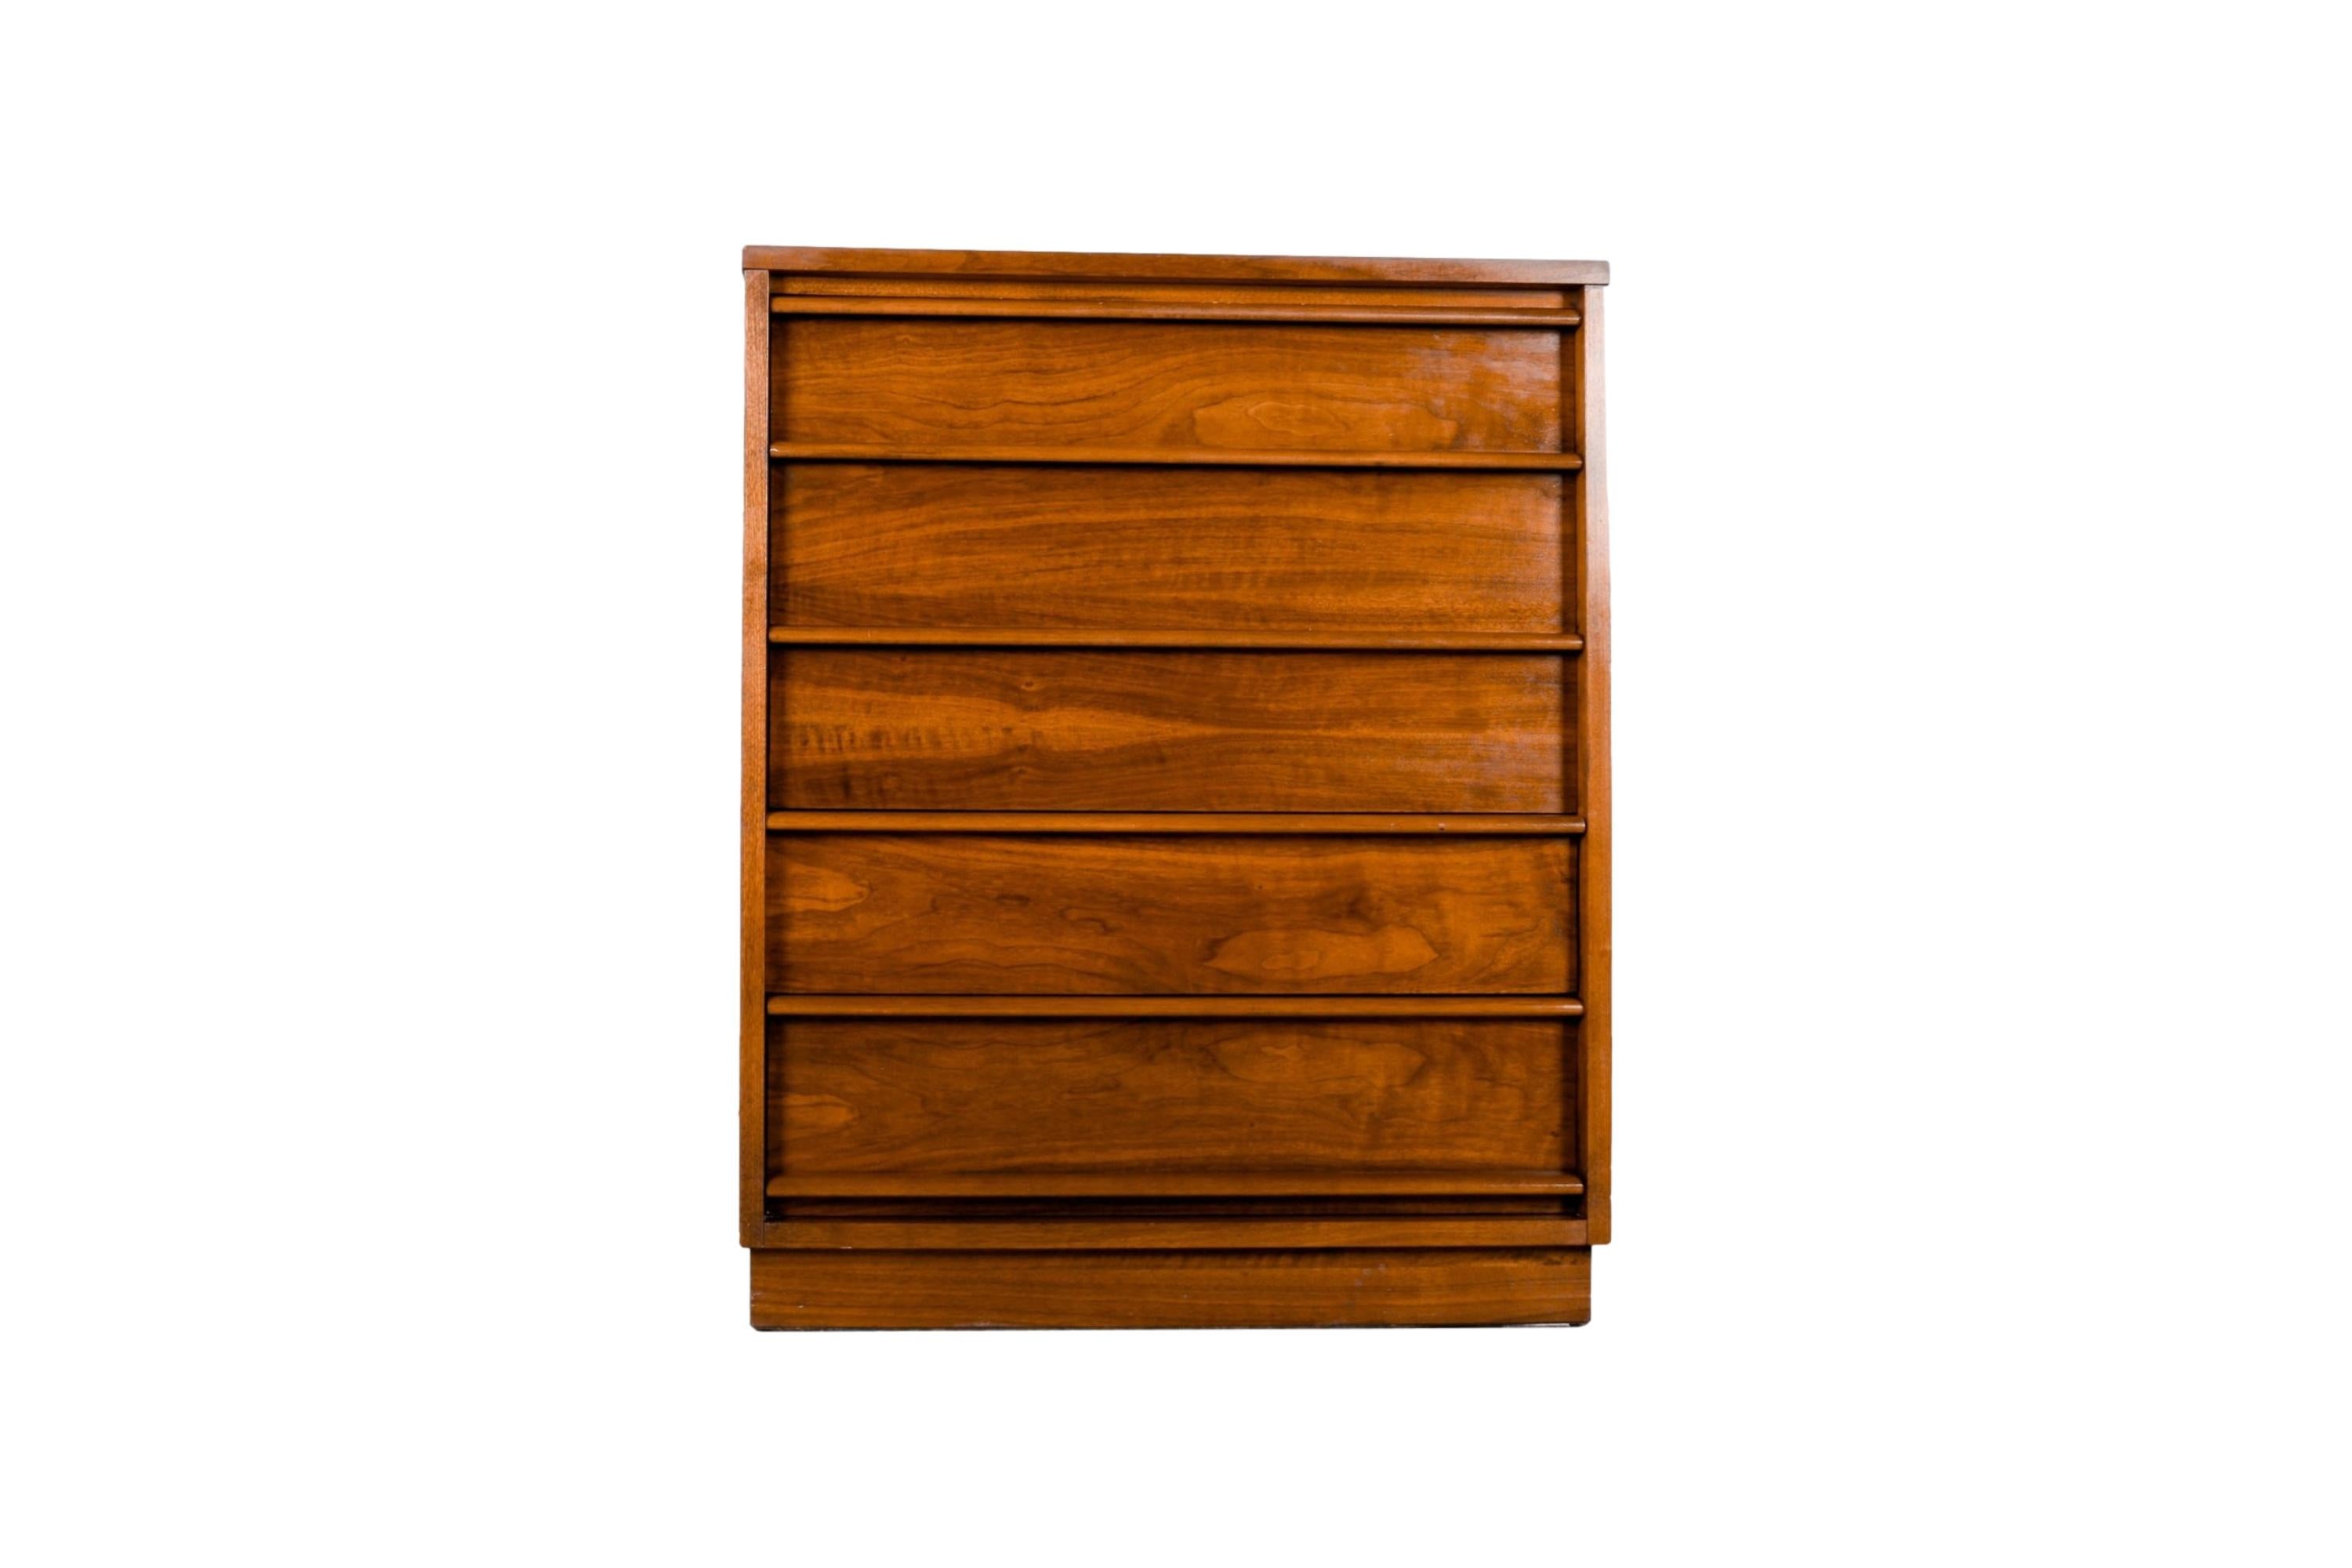 This is a beautiful example of Mid-Century craftsmanship by Lane furniture. This dresser is part of the Rhythm collection by Lane, built in the 1960’s, to have a style that was timeless then, and still is today. This retro piece was constructed with